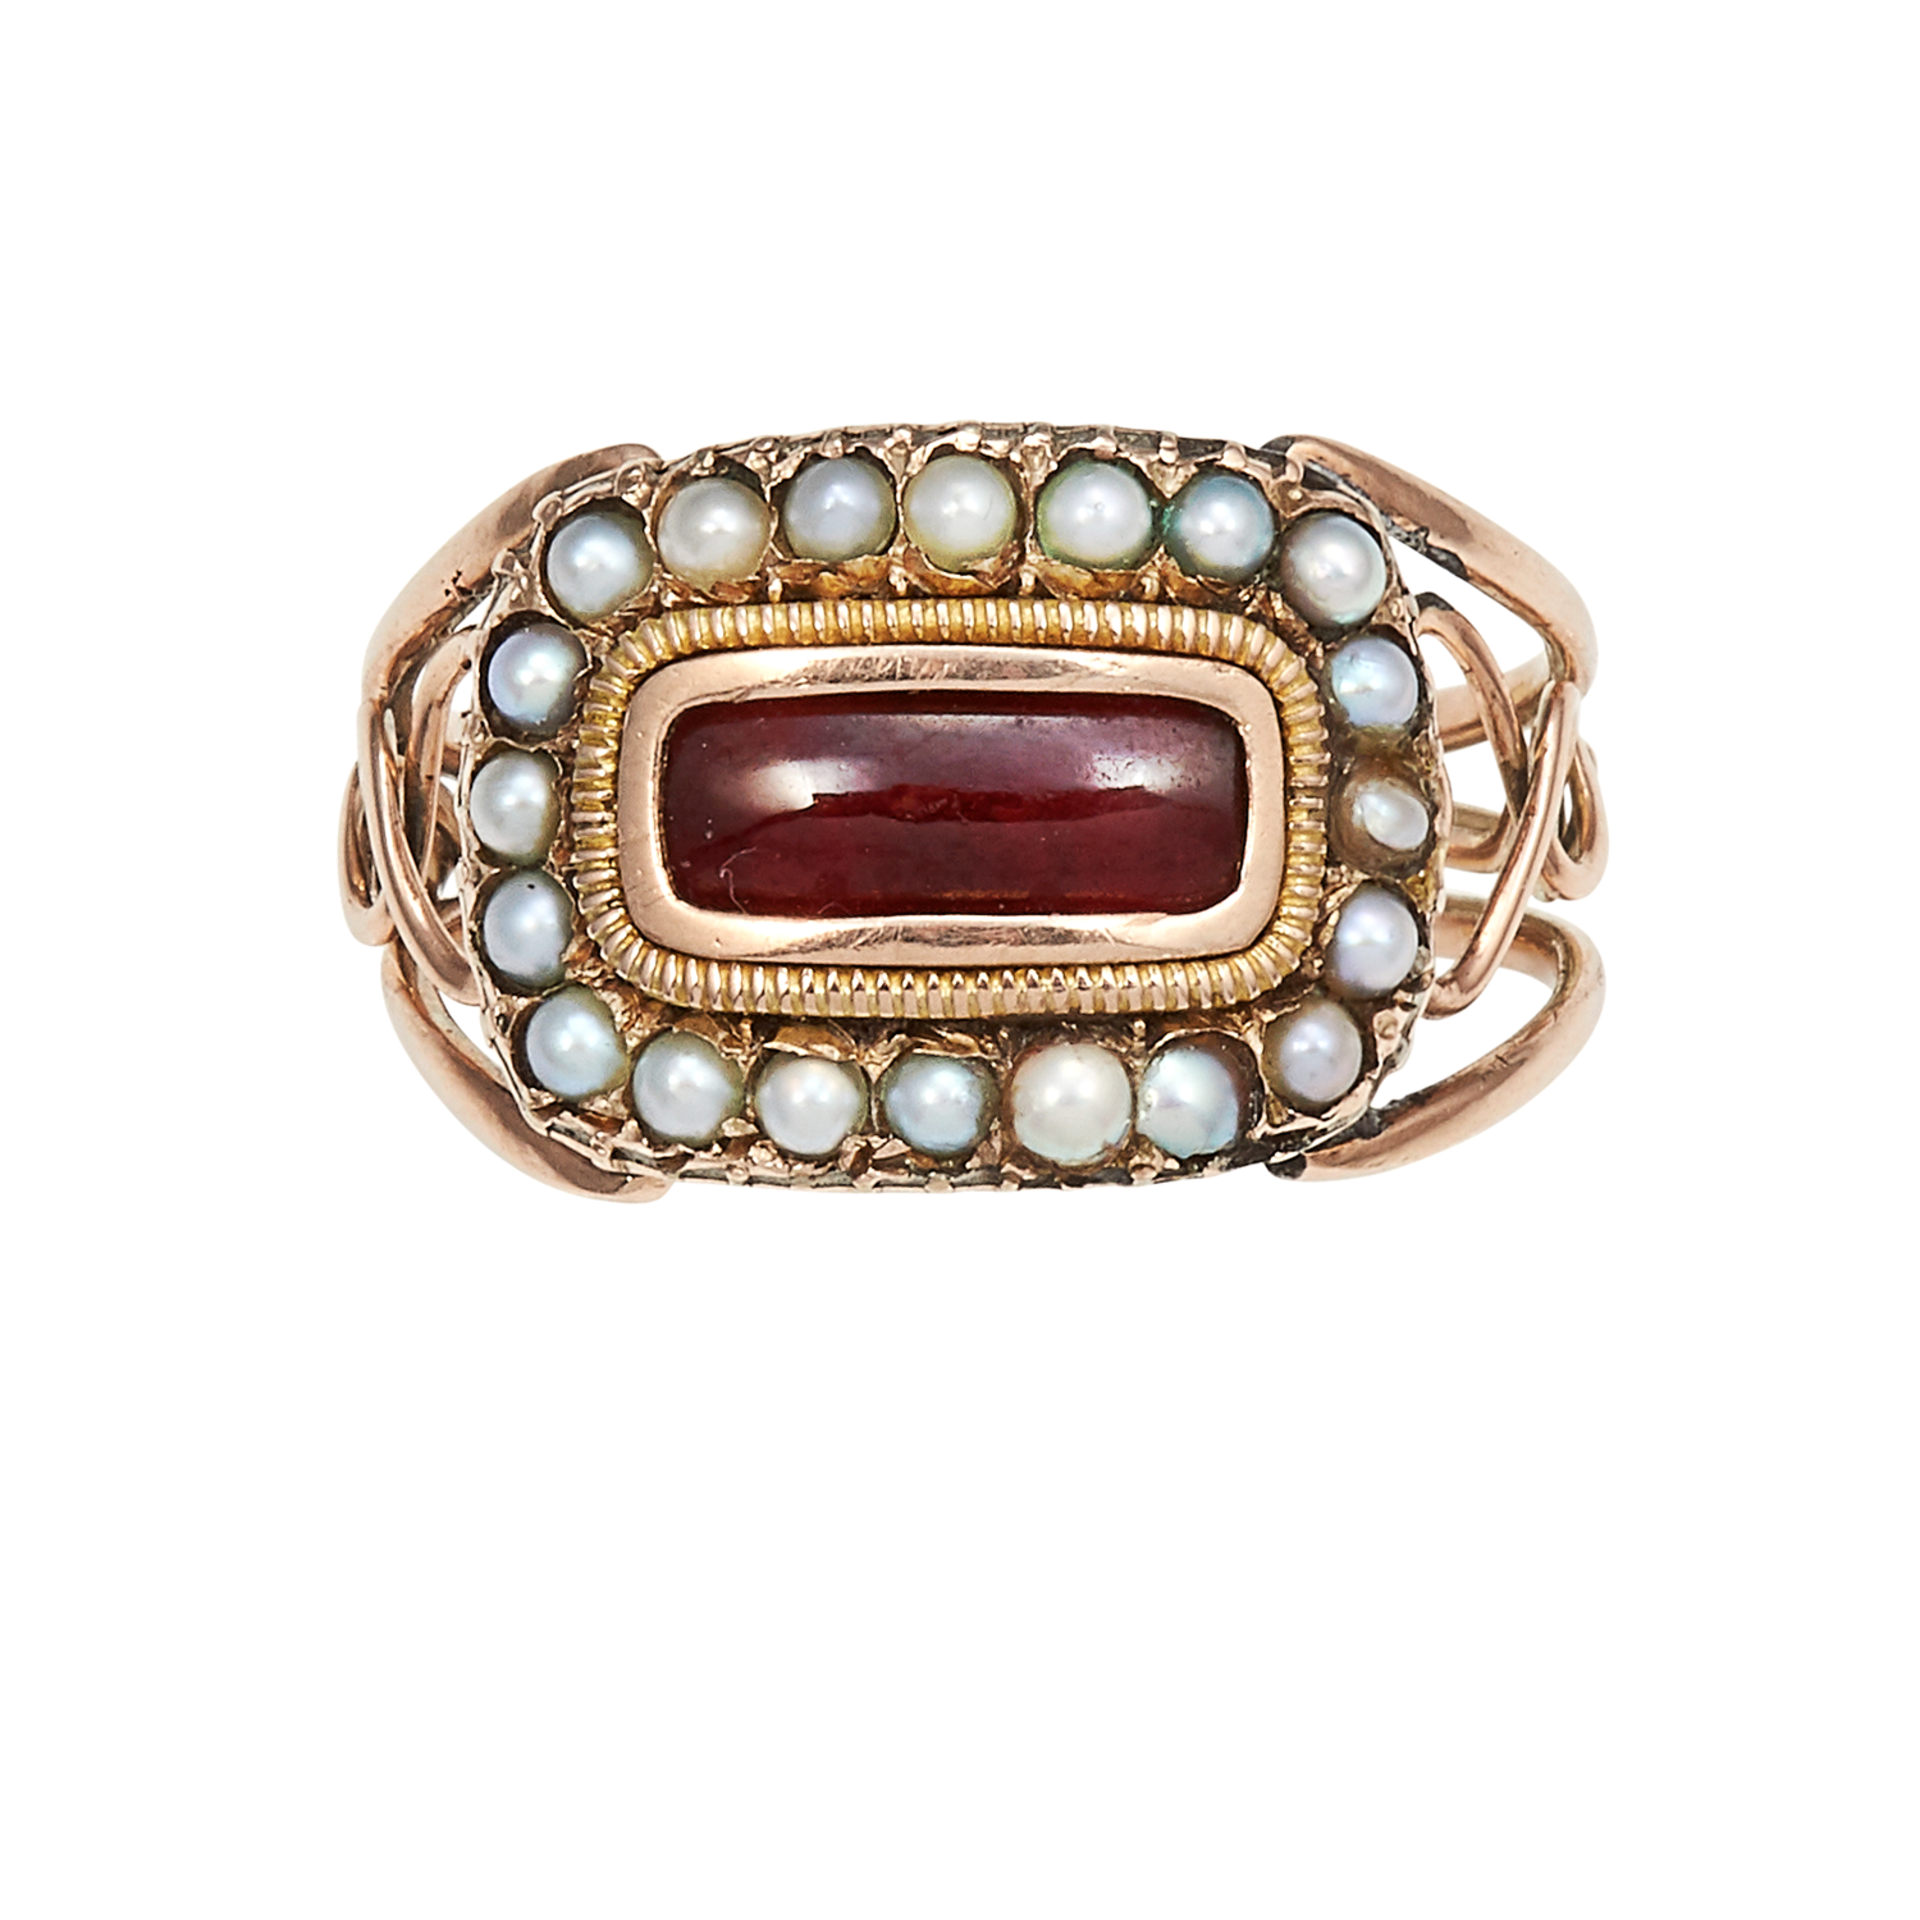 AN ANTIQUE GARNET AND SEED PEARL MOURNING RING, CIRCA 1830 in high carat yellow gold, set with an